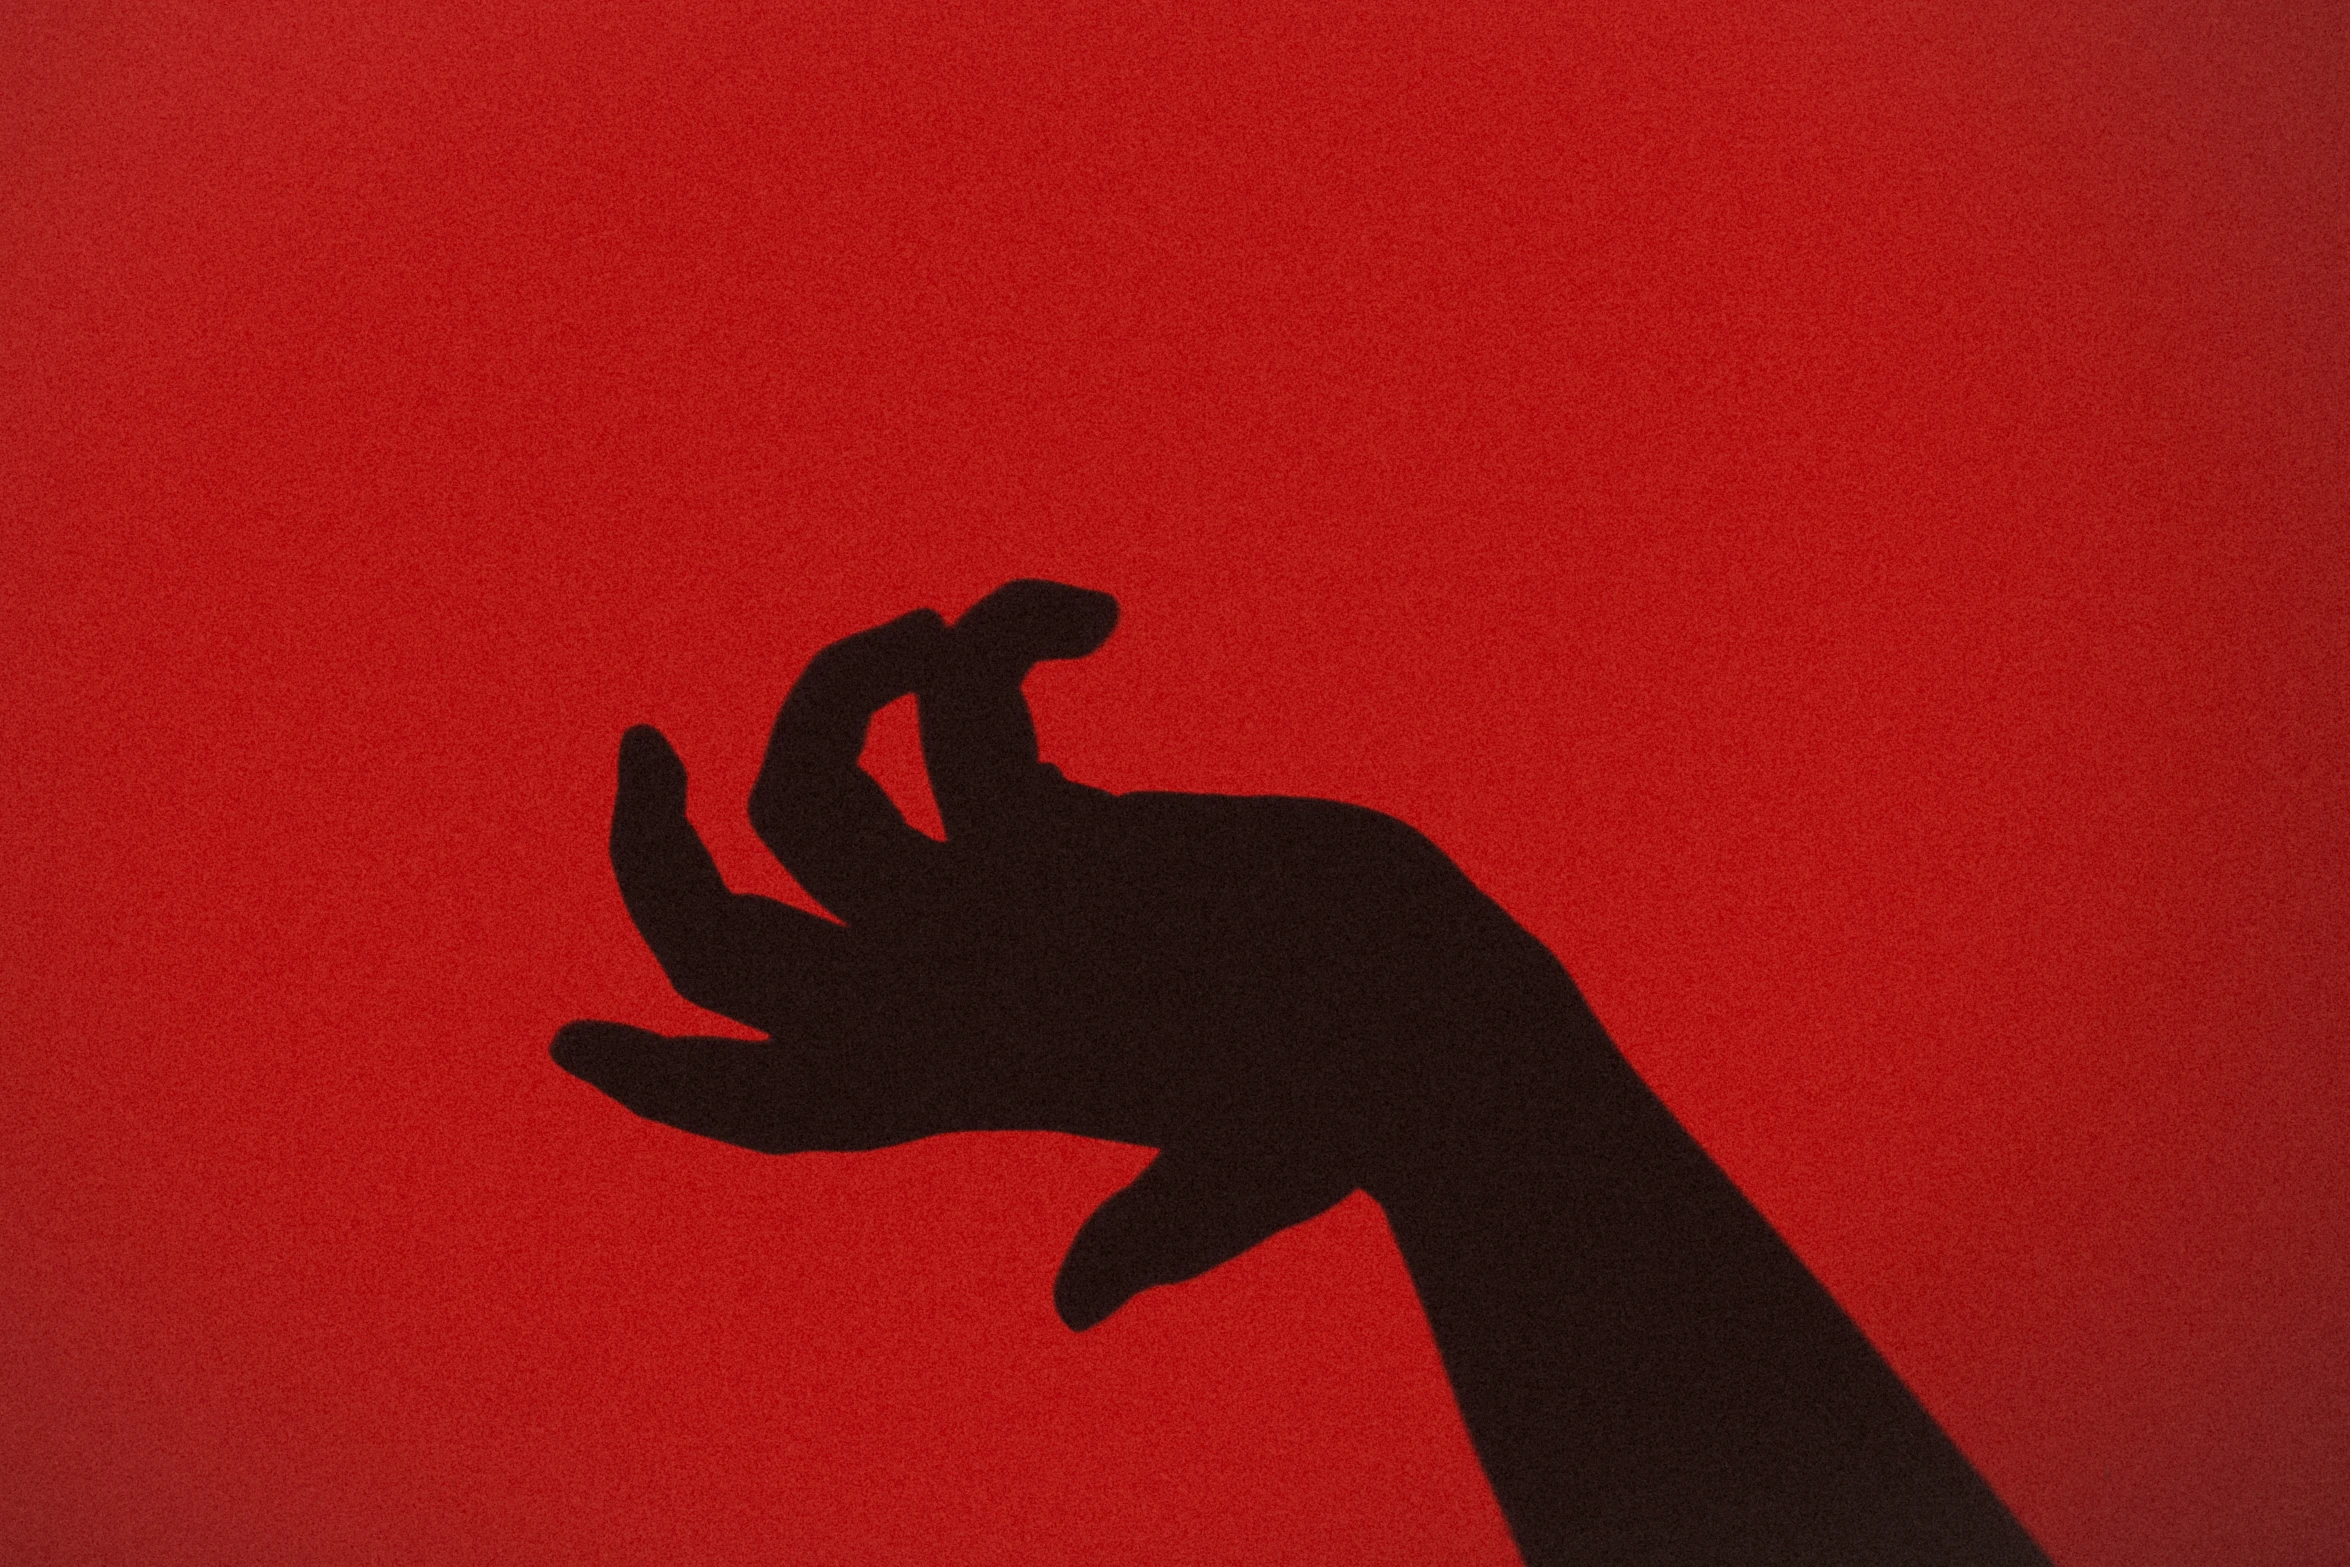 a shadow of a hand holding a bird up in the air